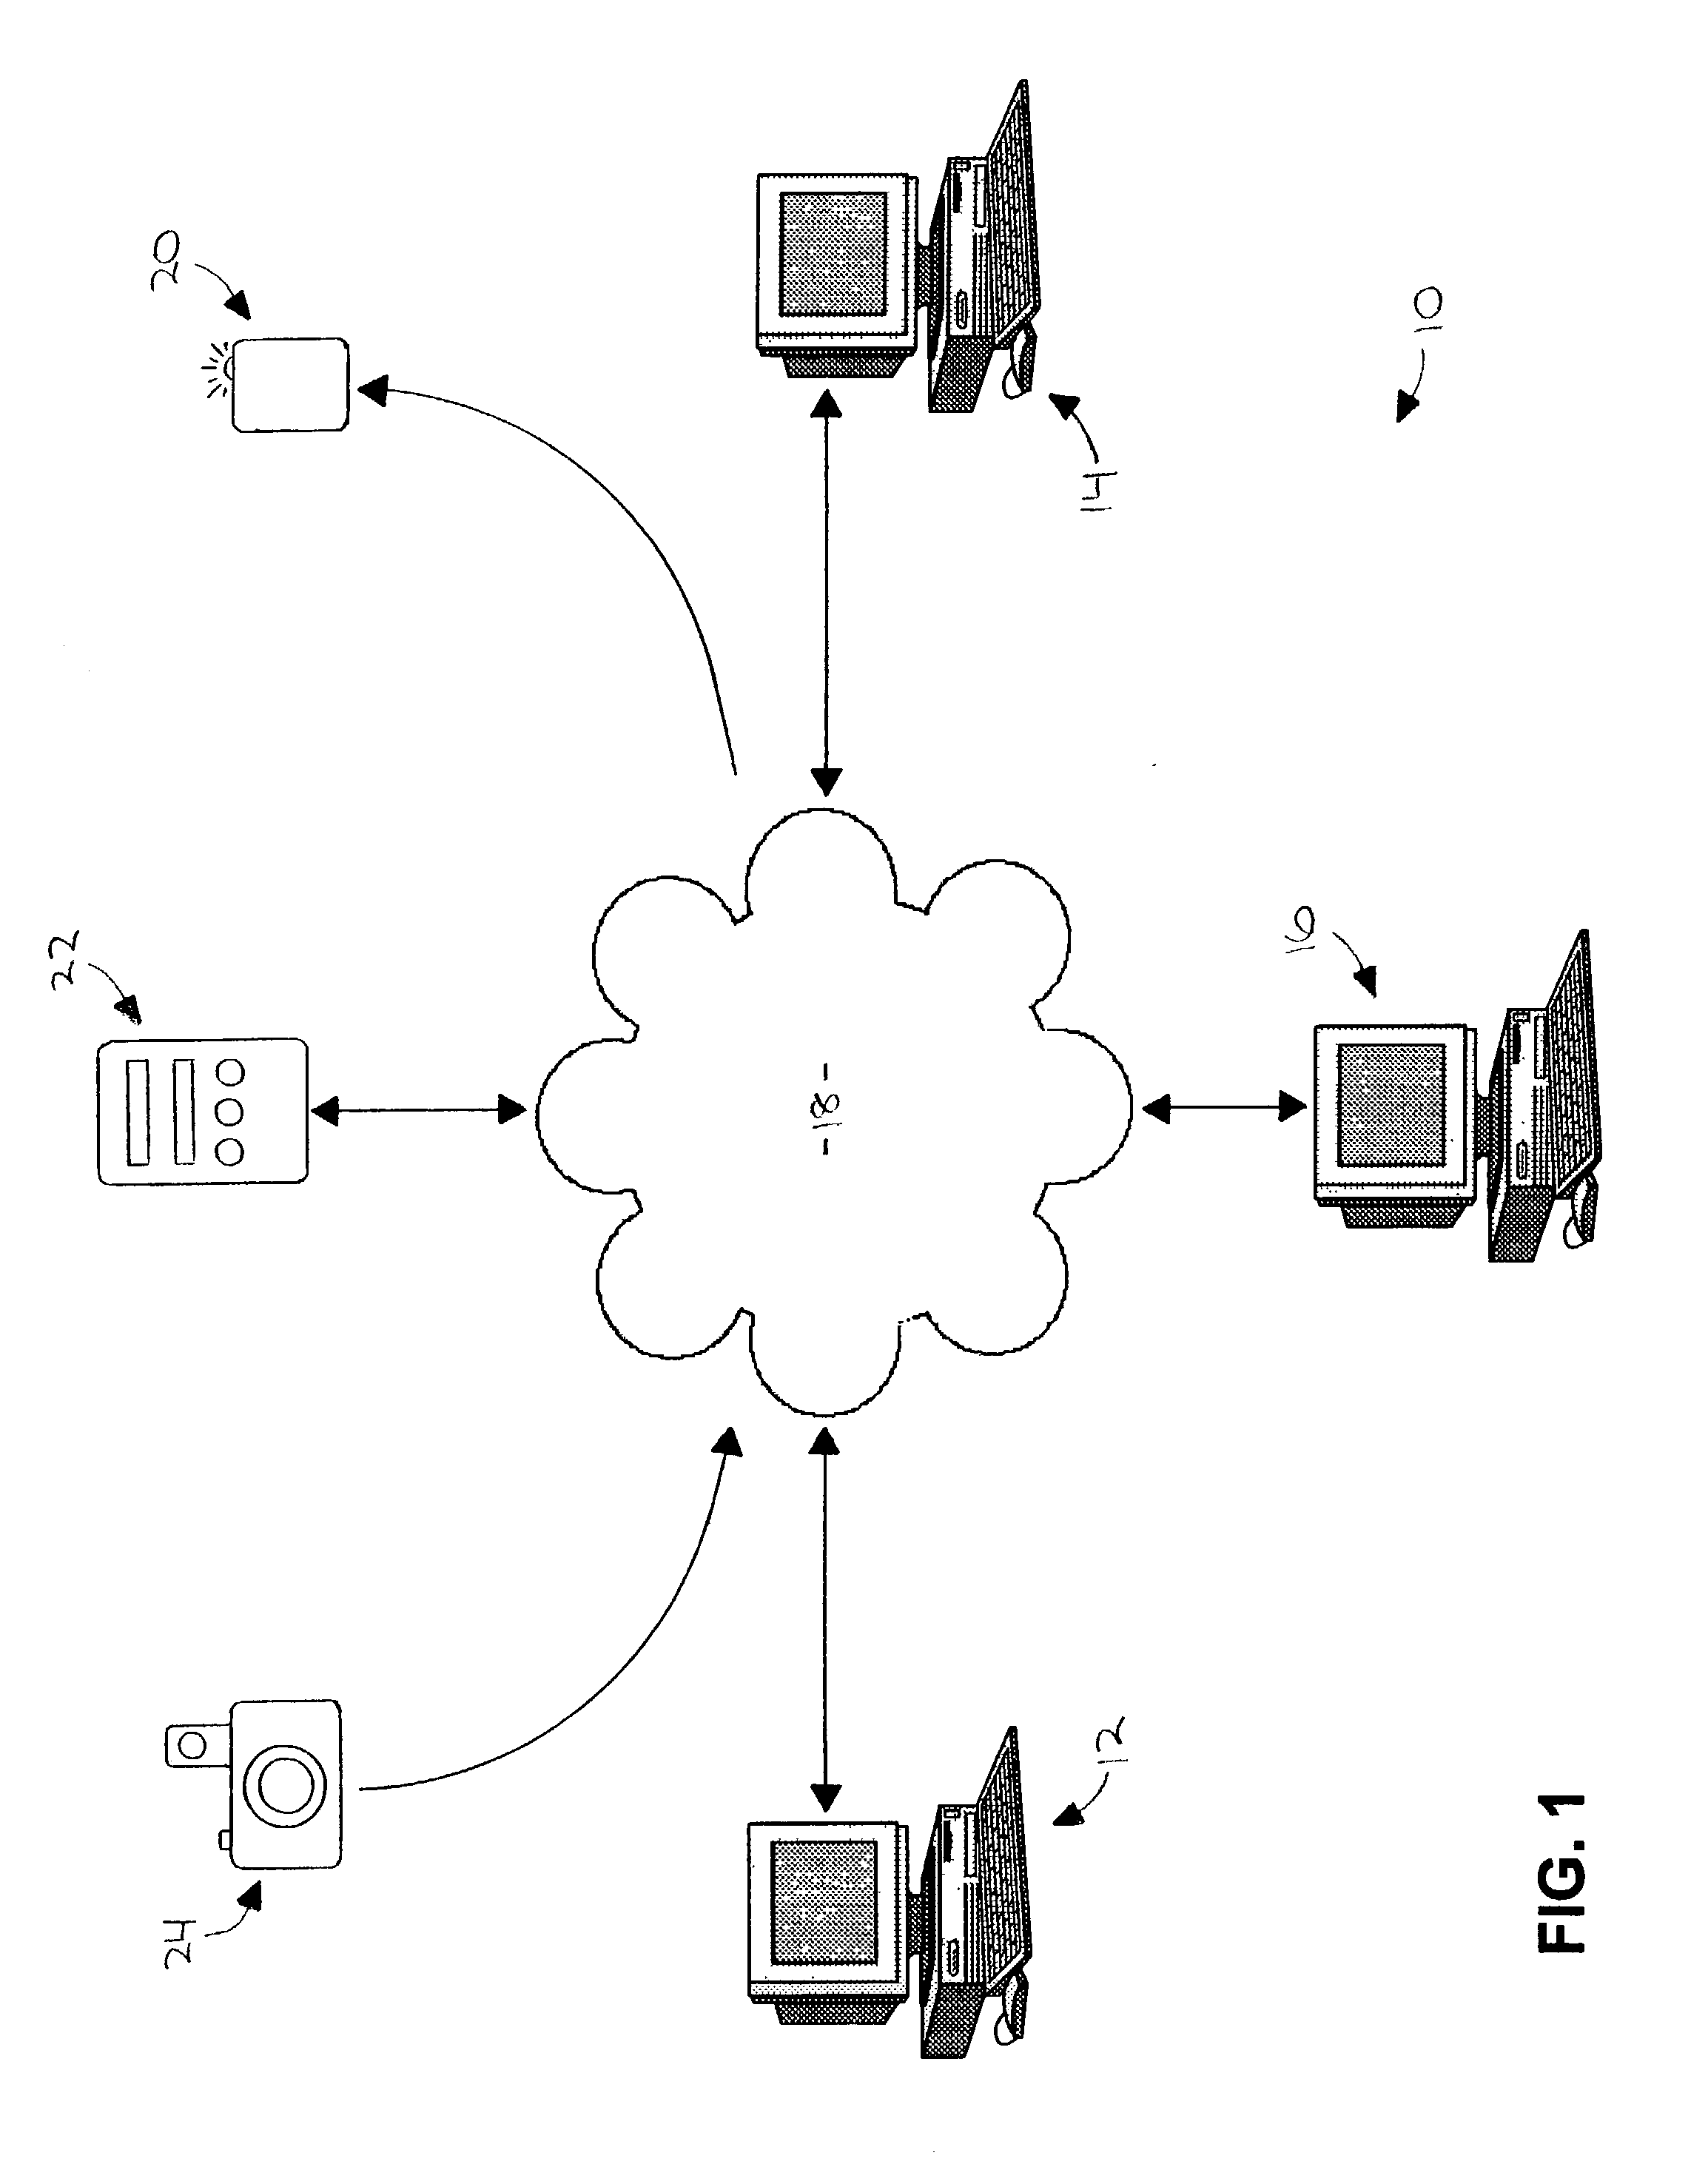 Method of facilitating access to remote health-related services, practitioners, and information